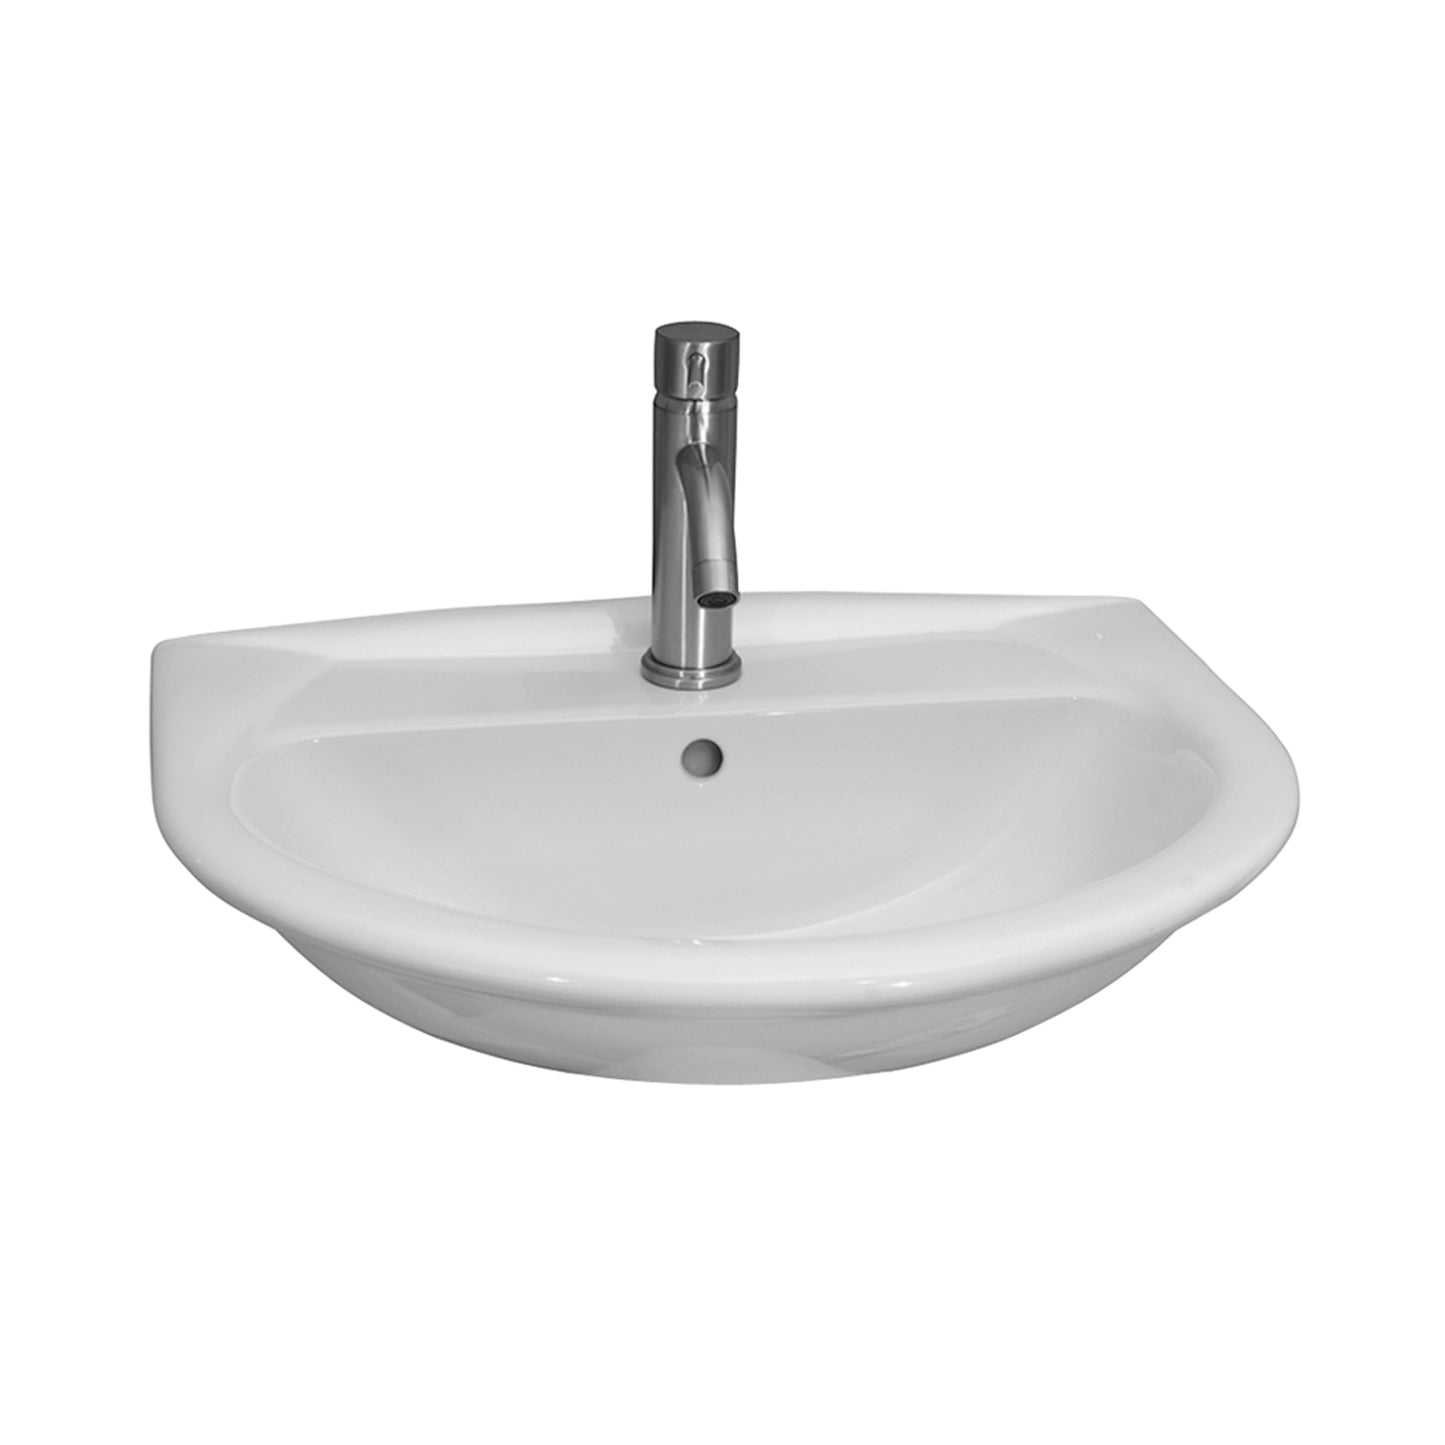 Karla 505 Wall Hung Sink with 1 Faucet Hole and Overflow White